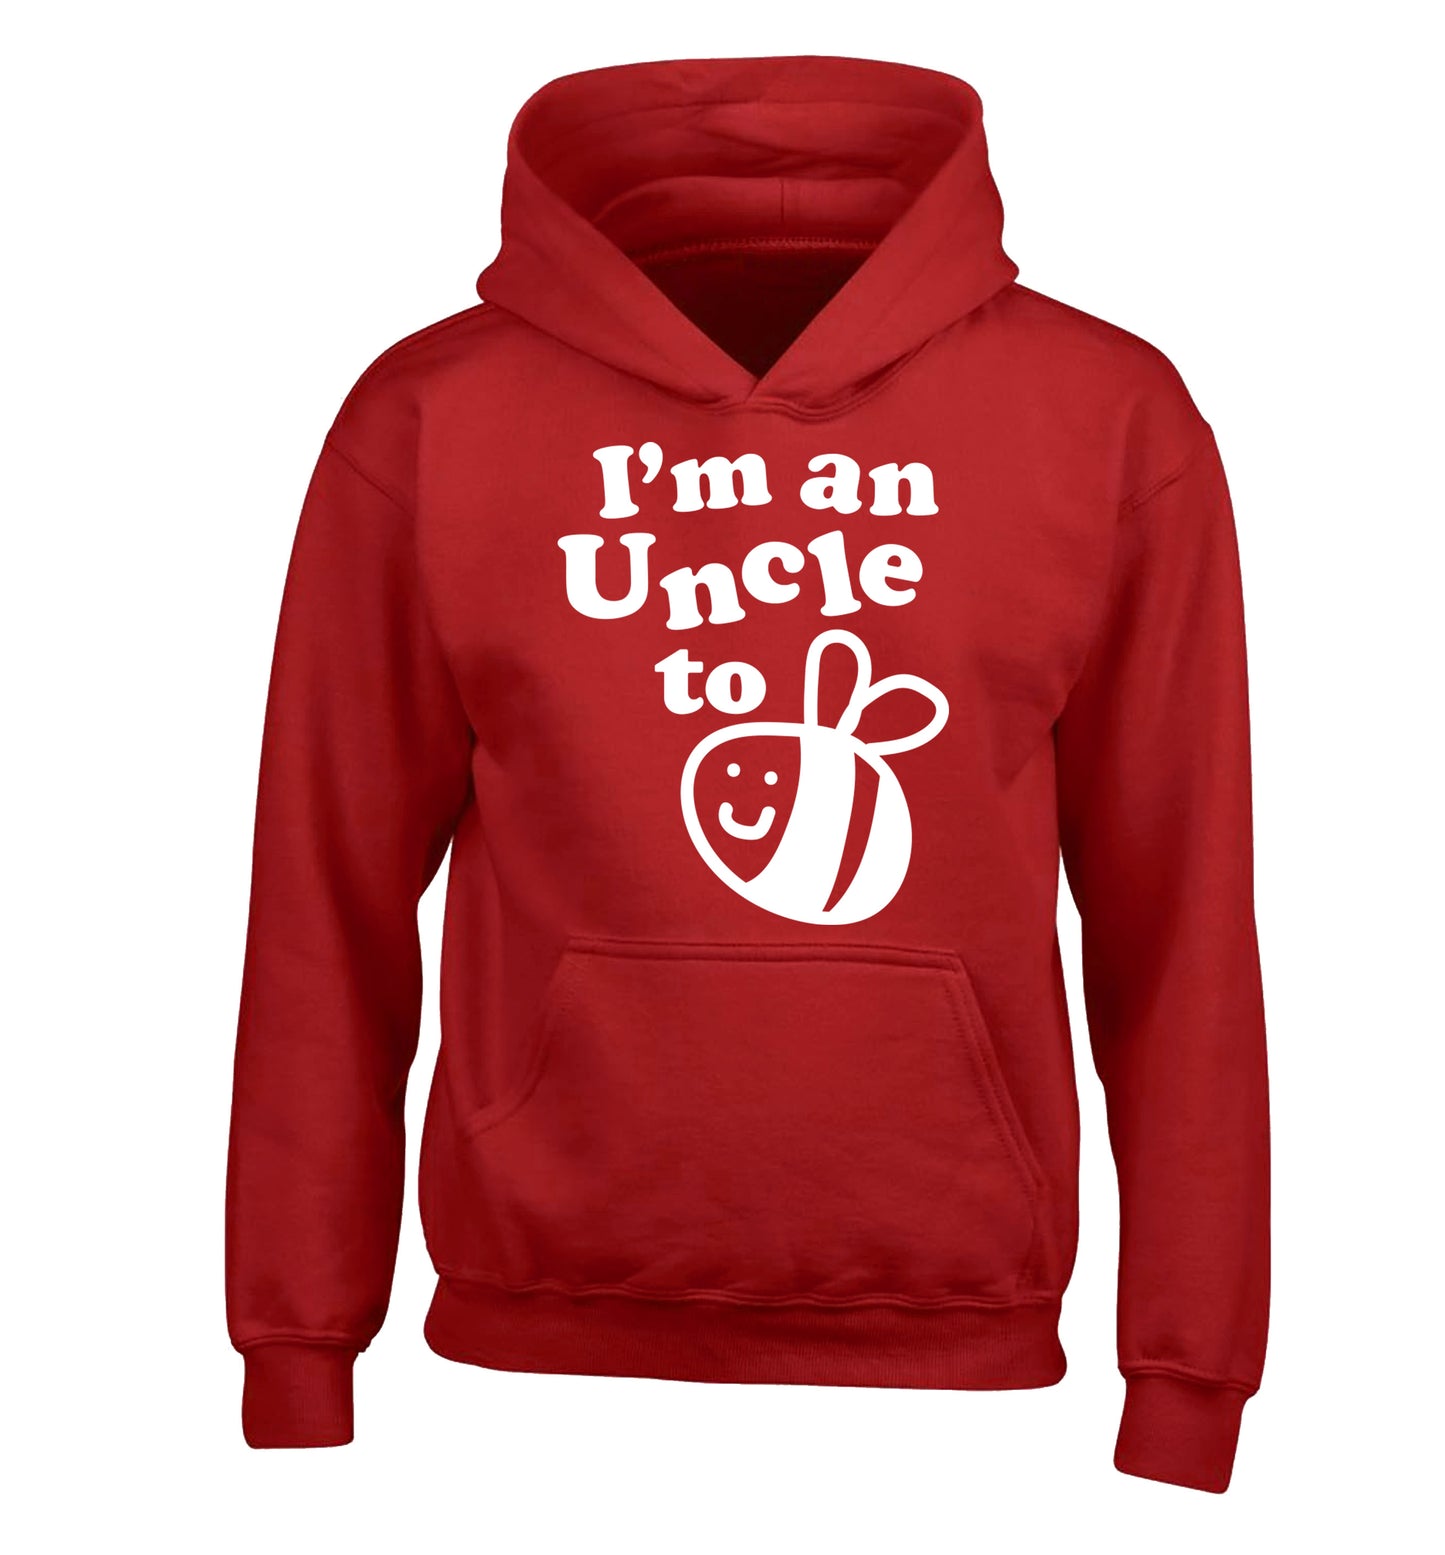 I'm an uncle to be children's red hoodie 12-14 Years